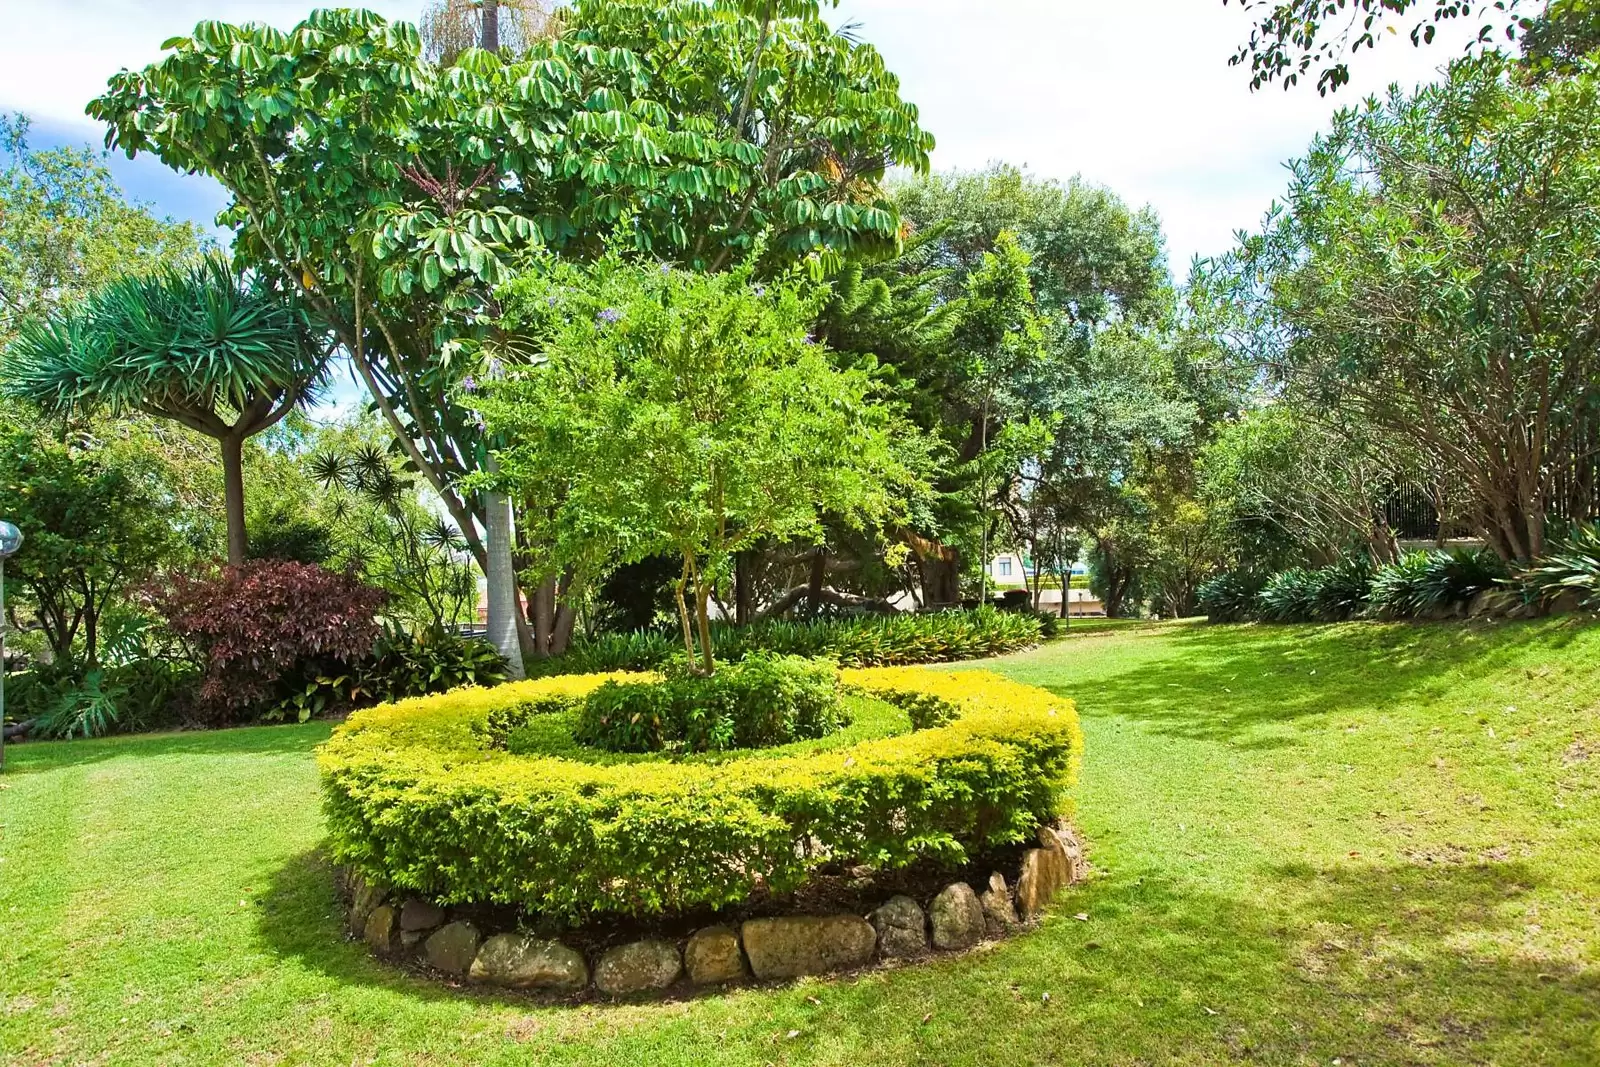 Photo #15: 18G/3 Darling Point Road, Darling Point - Sold by Sydney Sotheby's International Realty